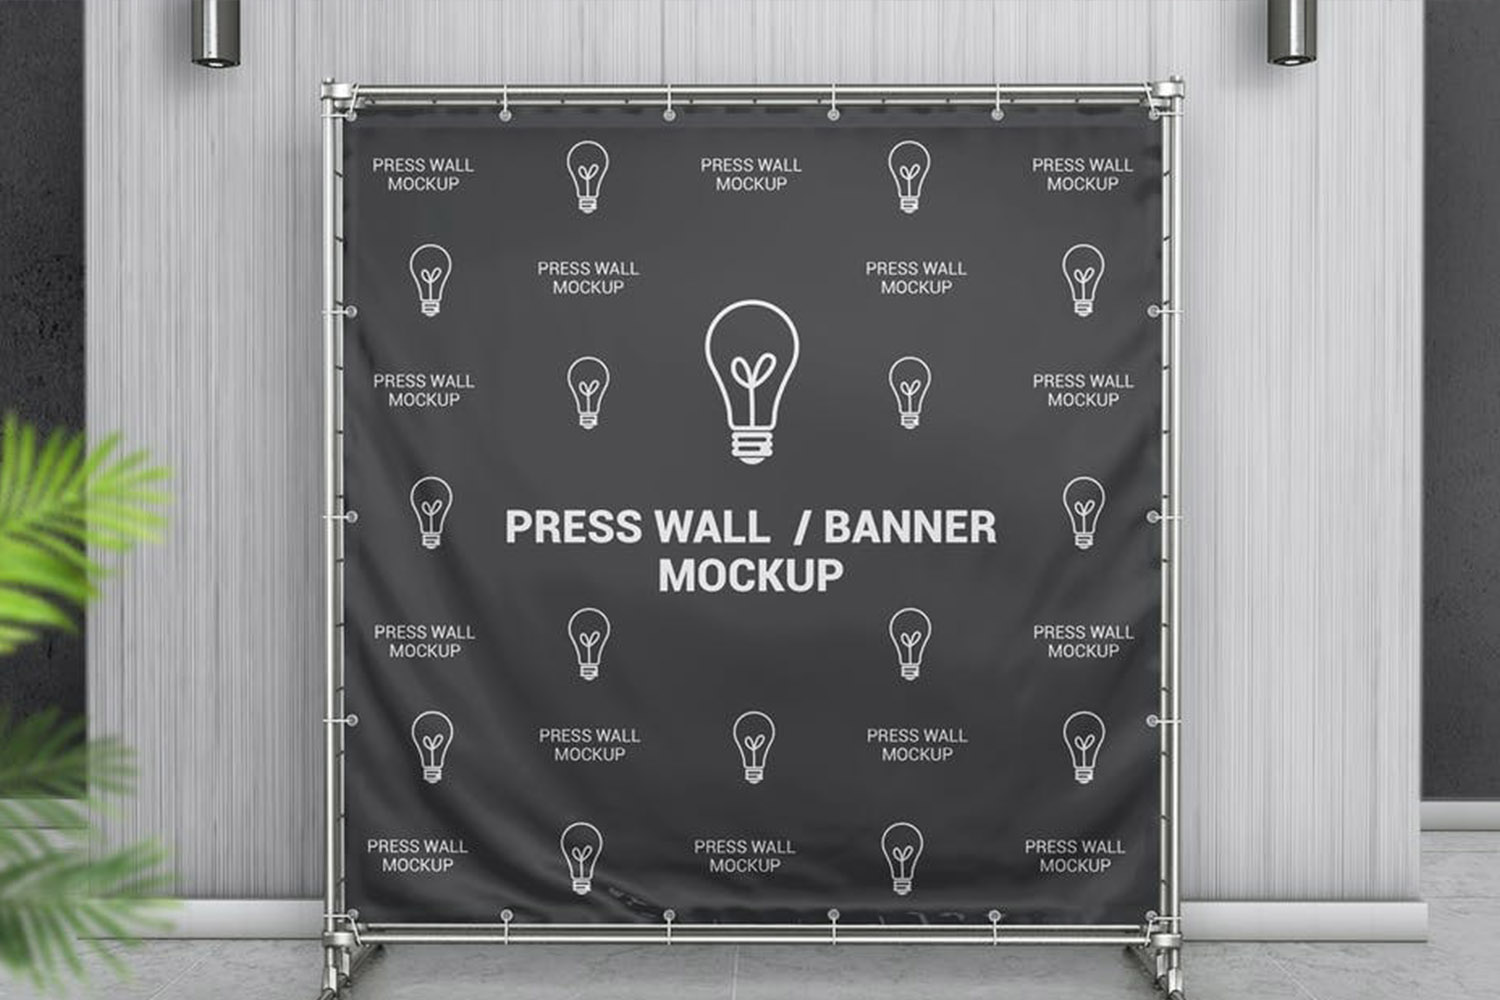 Square Press Wall Stand Banner Mockup Free Download